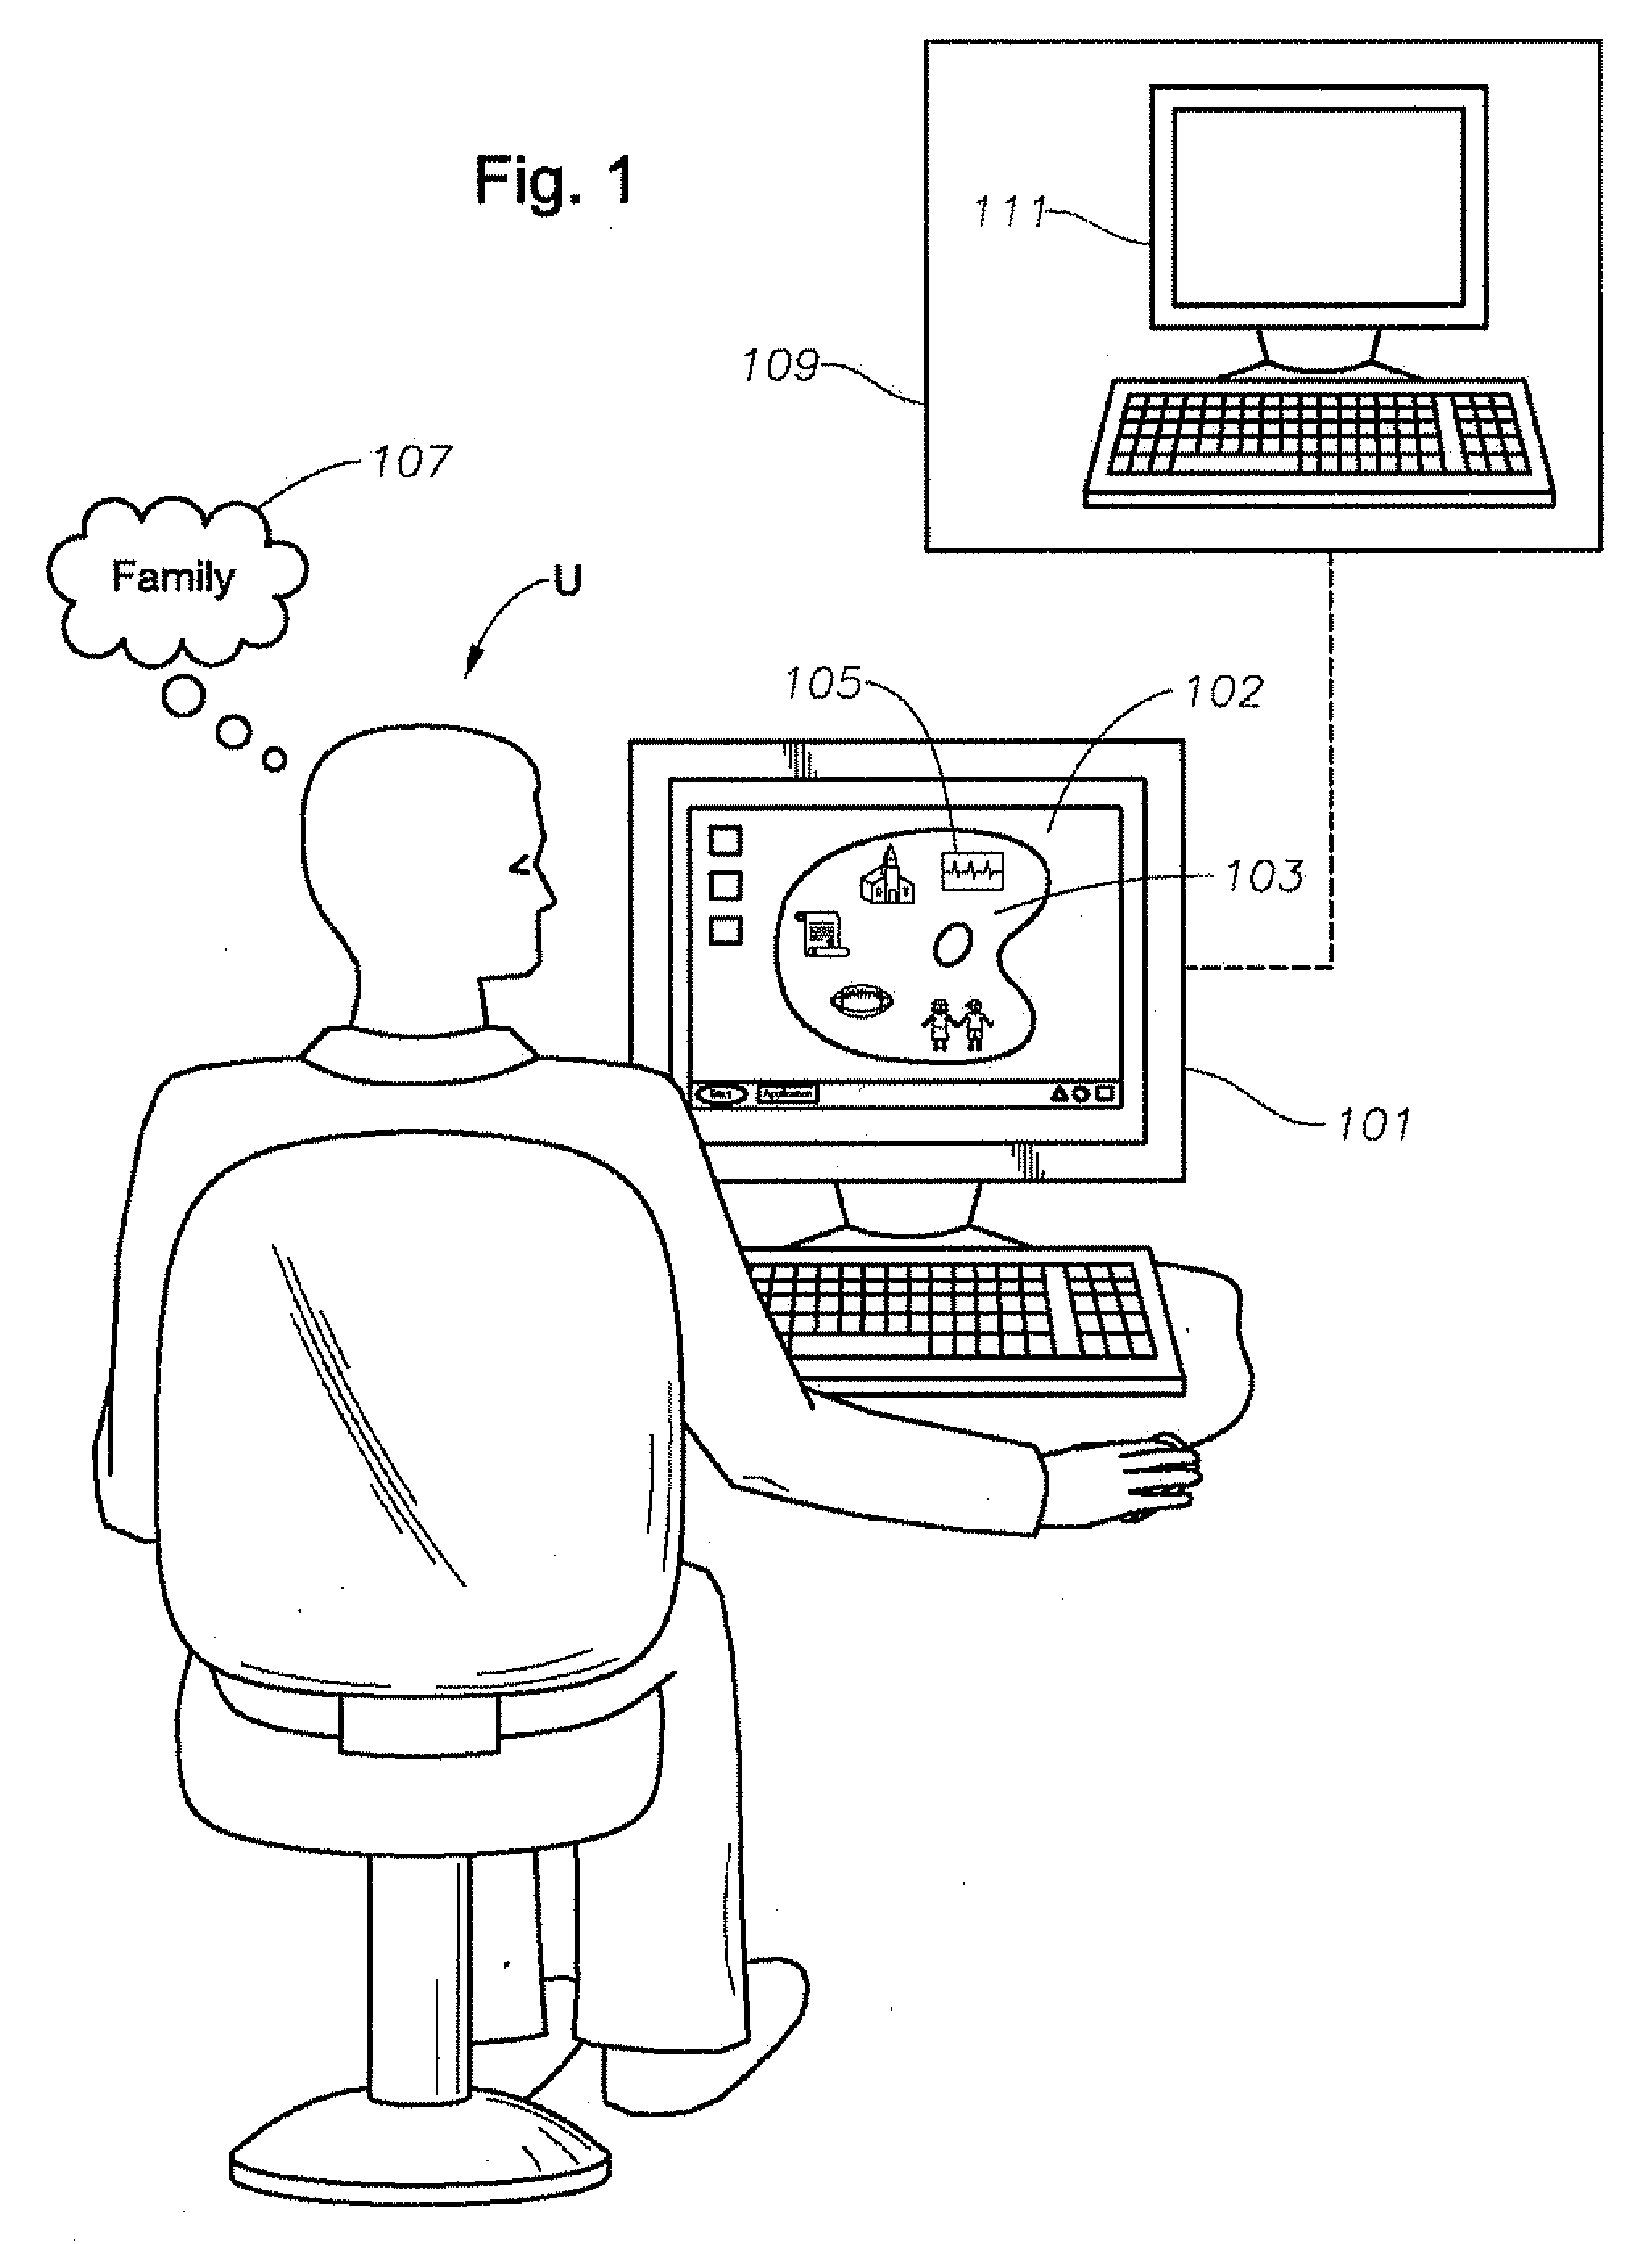 Machine, Program Product, And Computer-Implemented Method For File Management, Storage, And Display In Albums Utilizing A Questionnaire